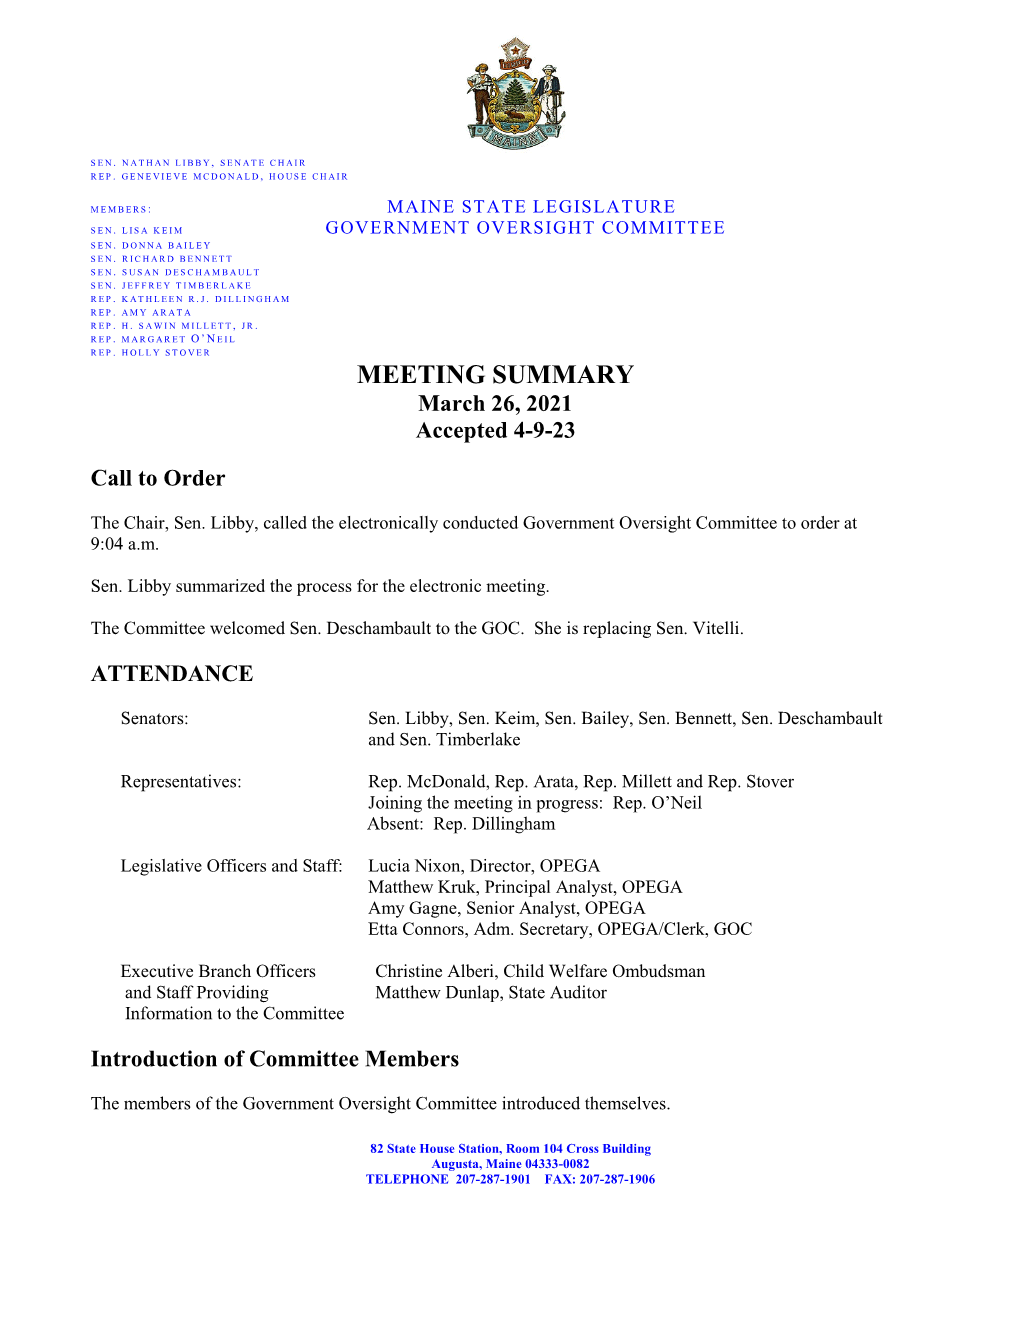 MEETING SUMMARY March 26, 2021 Accepted 4-9-23